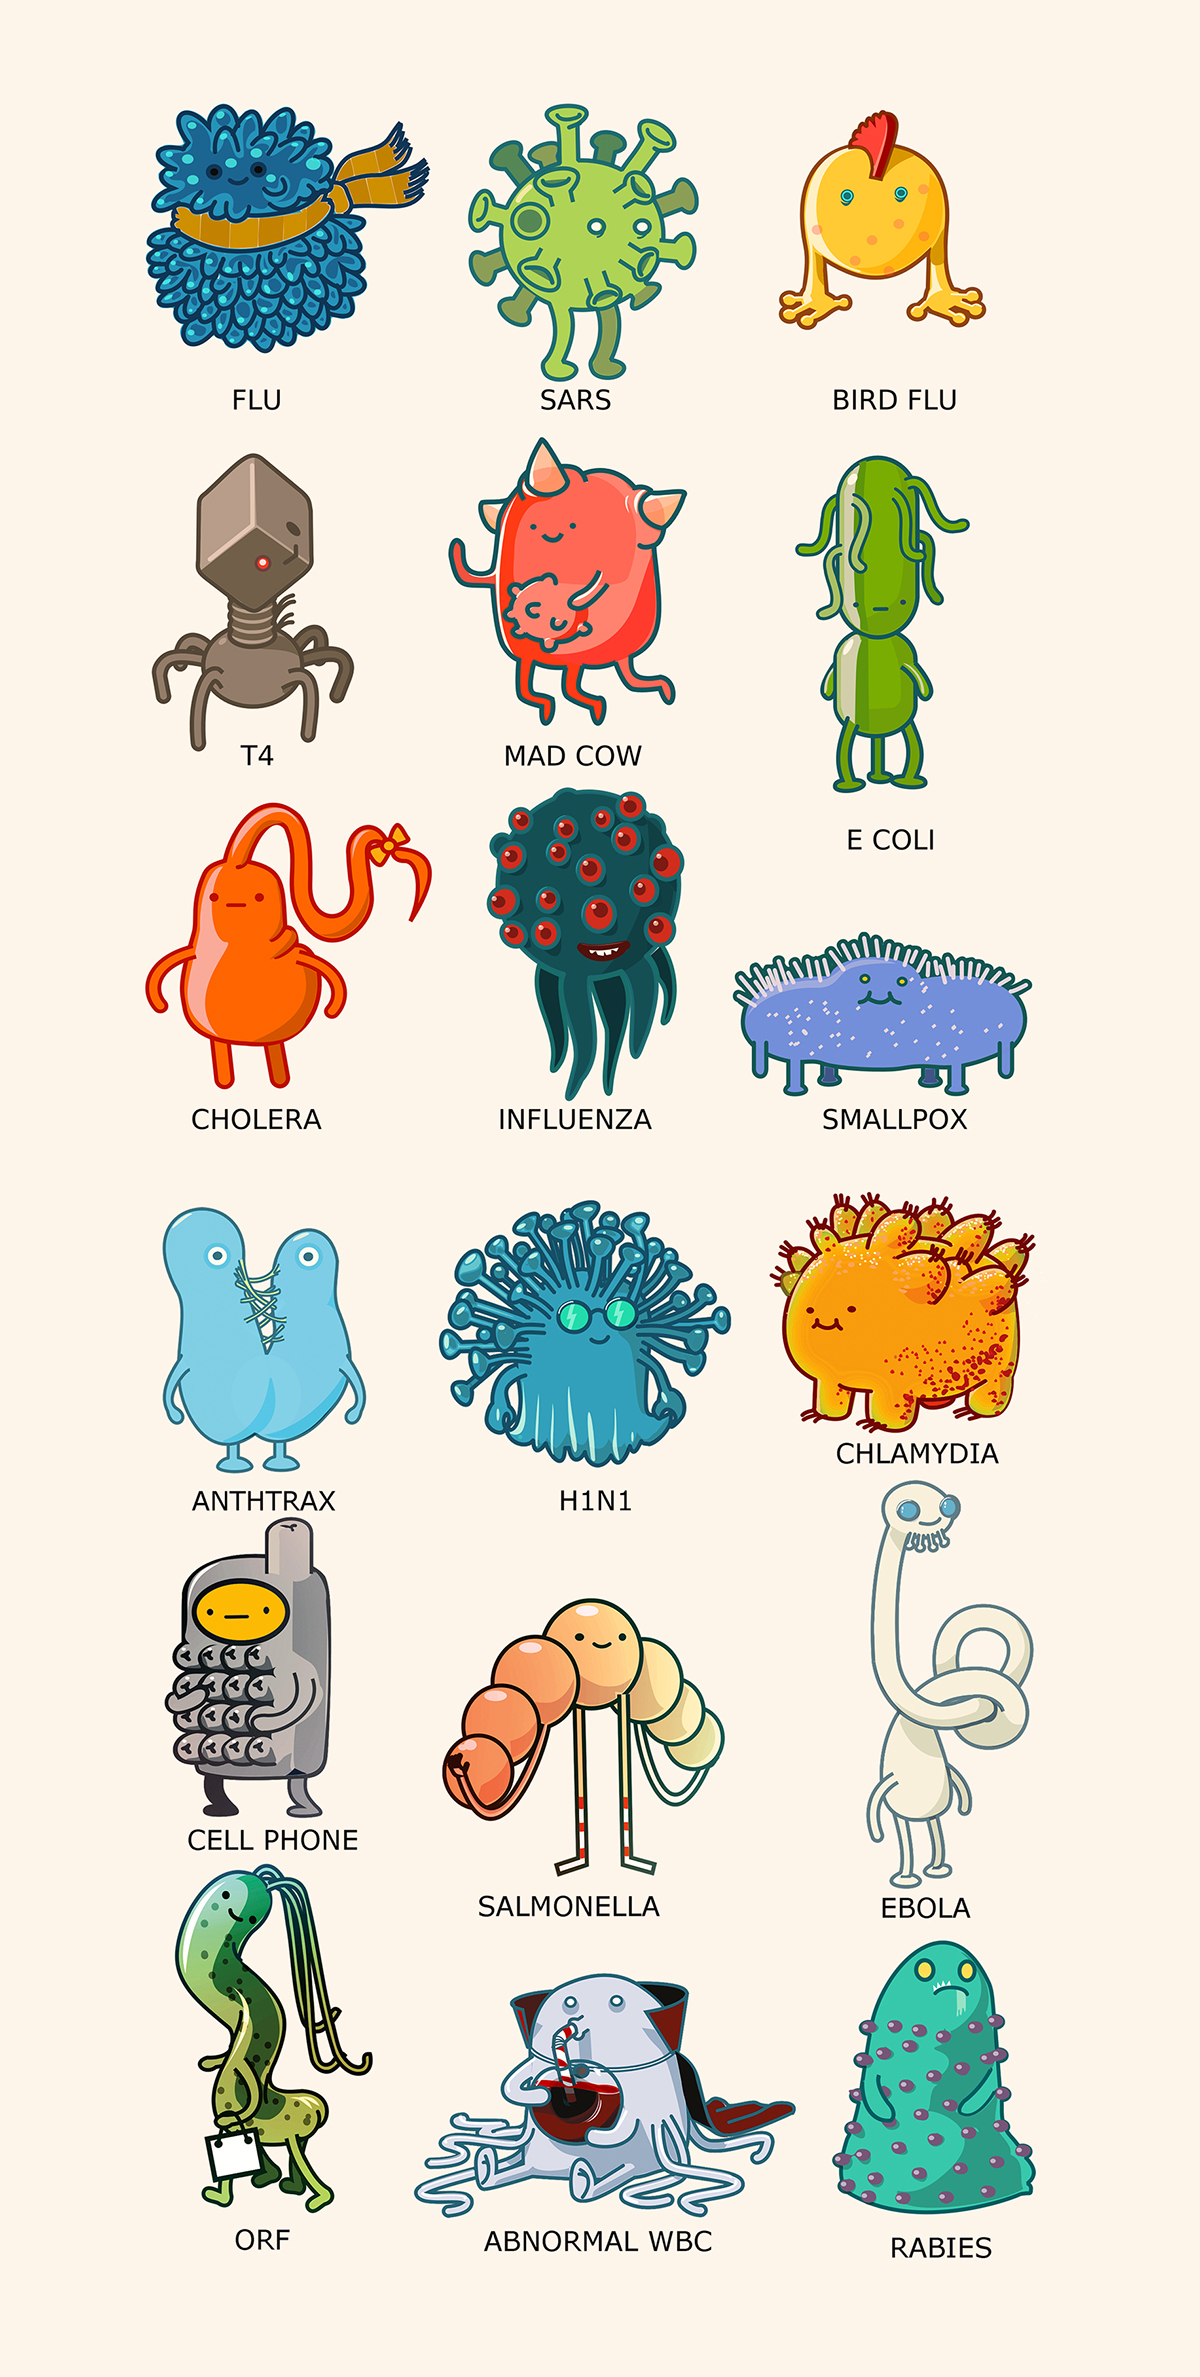 Killing me softly on. Cells clipart chlamydia